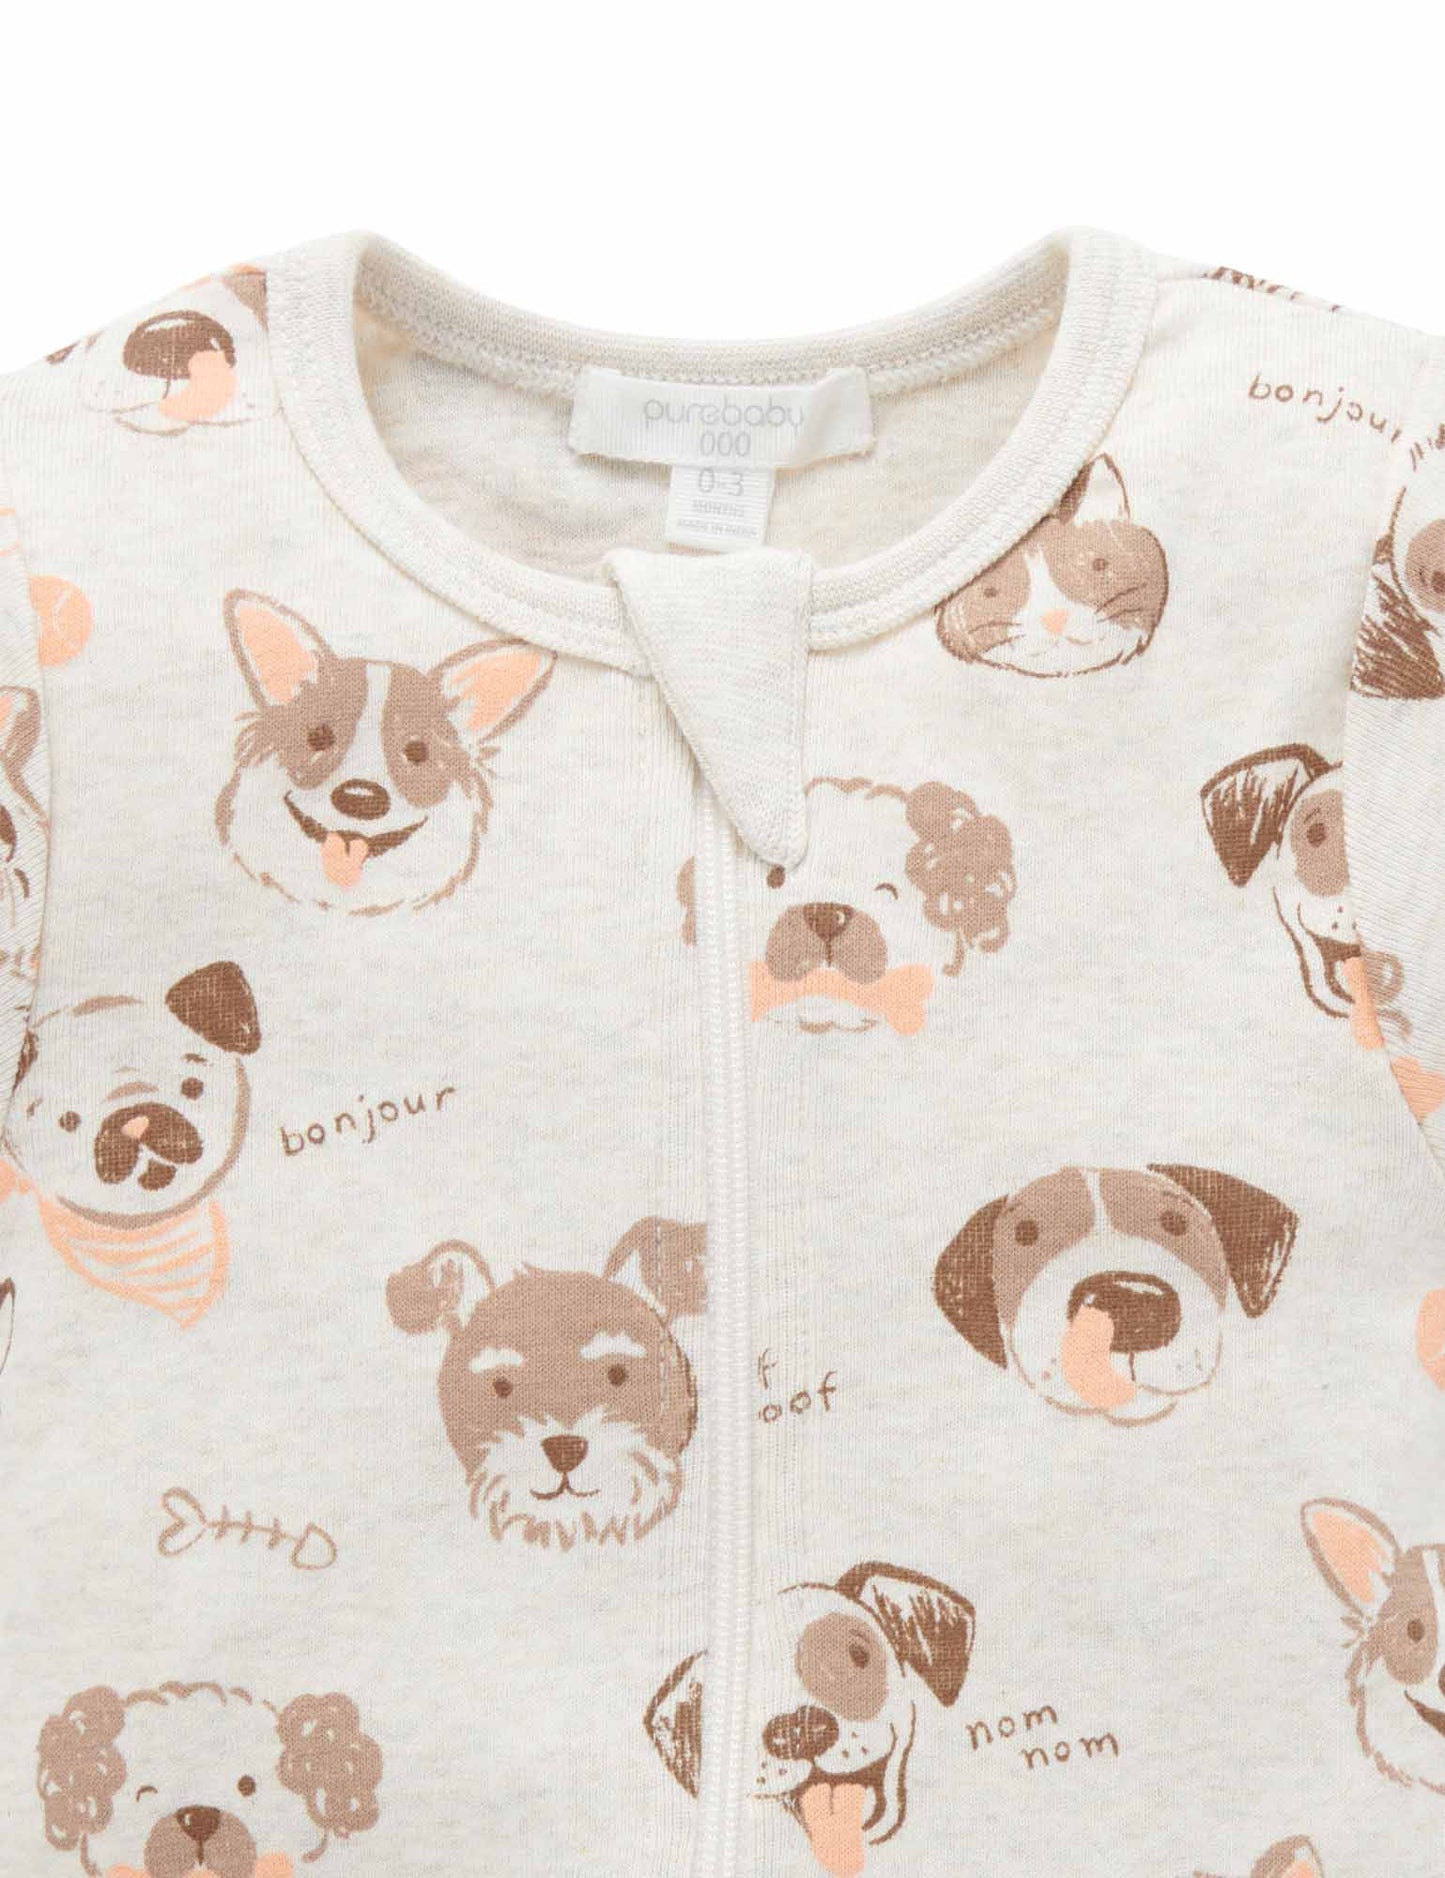 Purebaby ピュアベビー　SHORT SLEEVE ZIP GROWSUIT silly pets PS5003S23